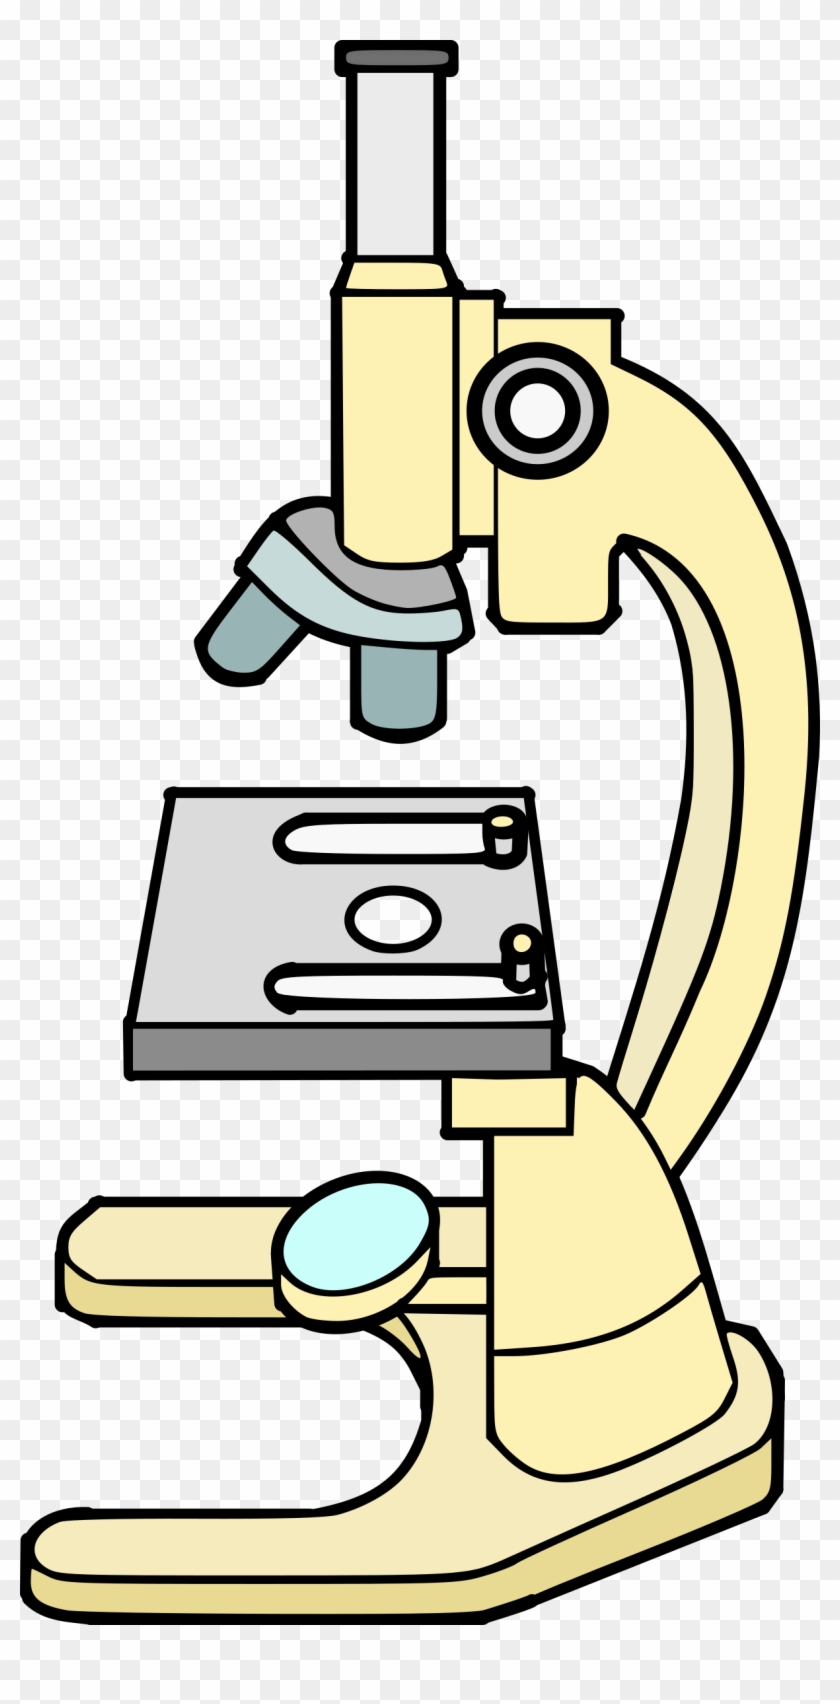 Big Image - Microscope Images Clip Art - Png Download #1703760